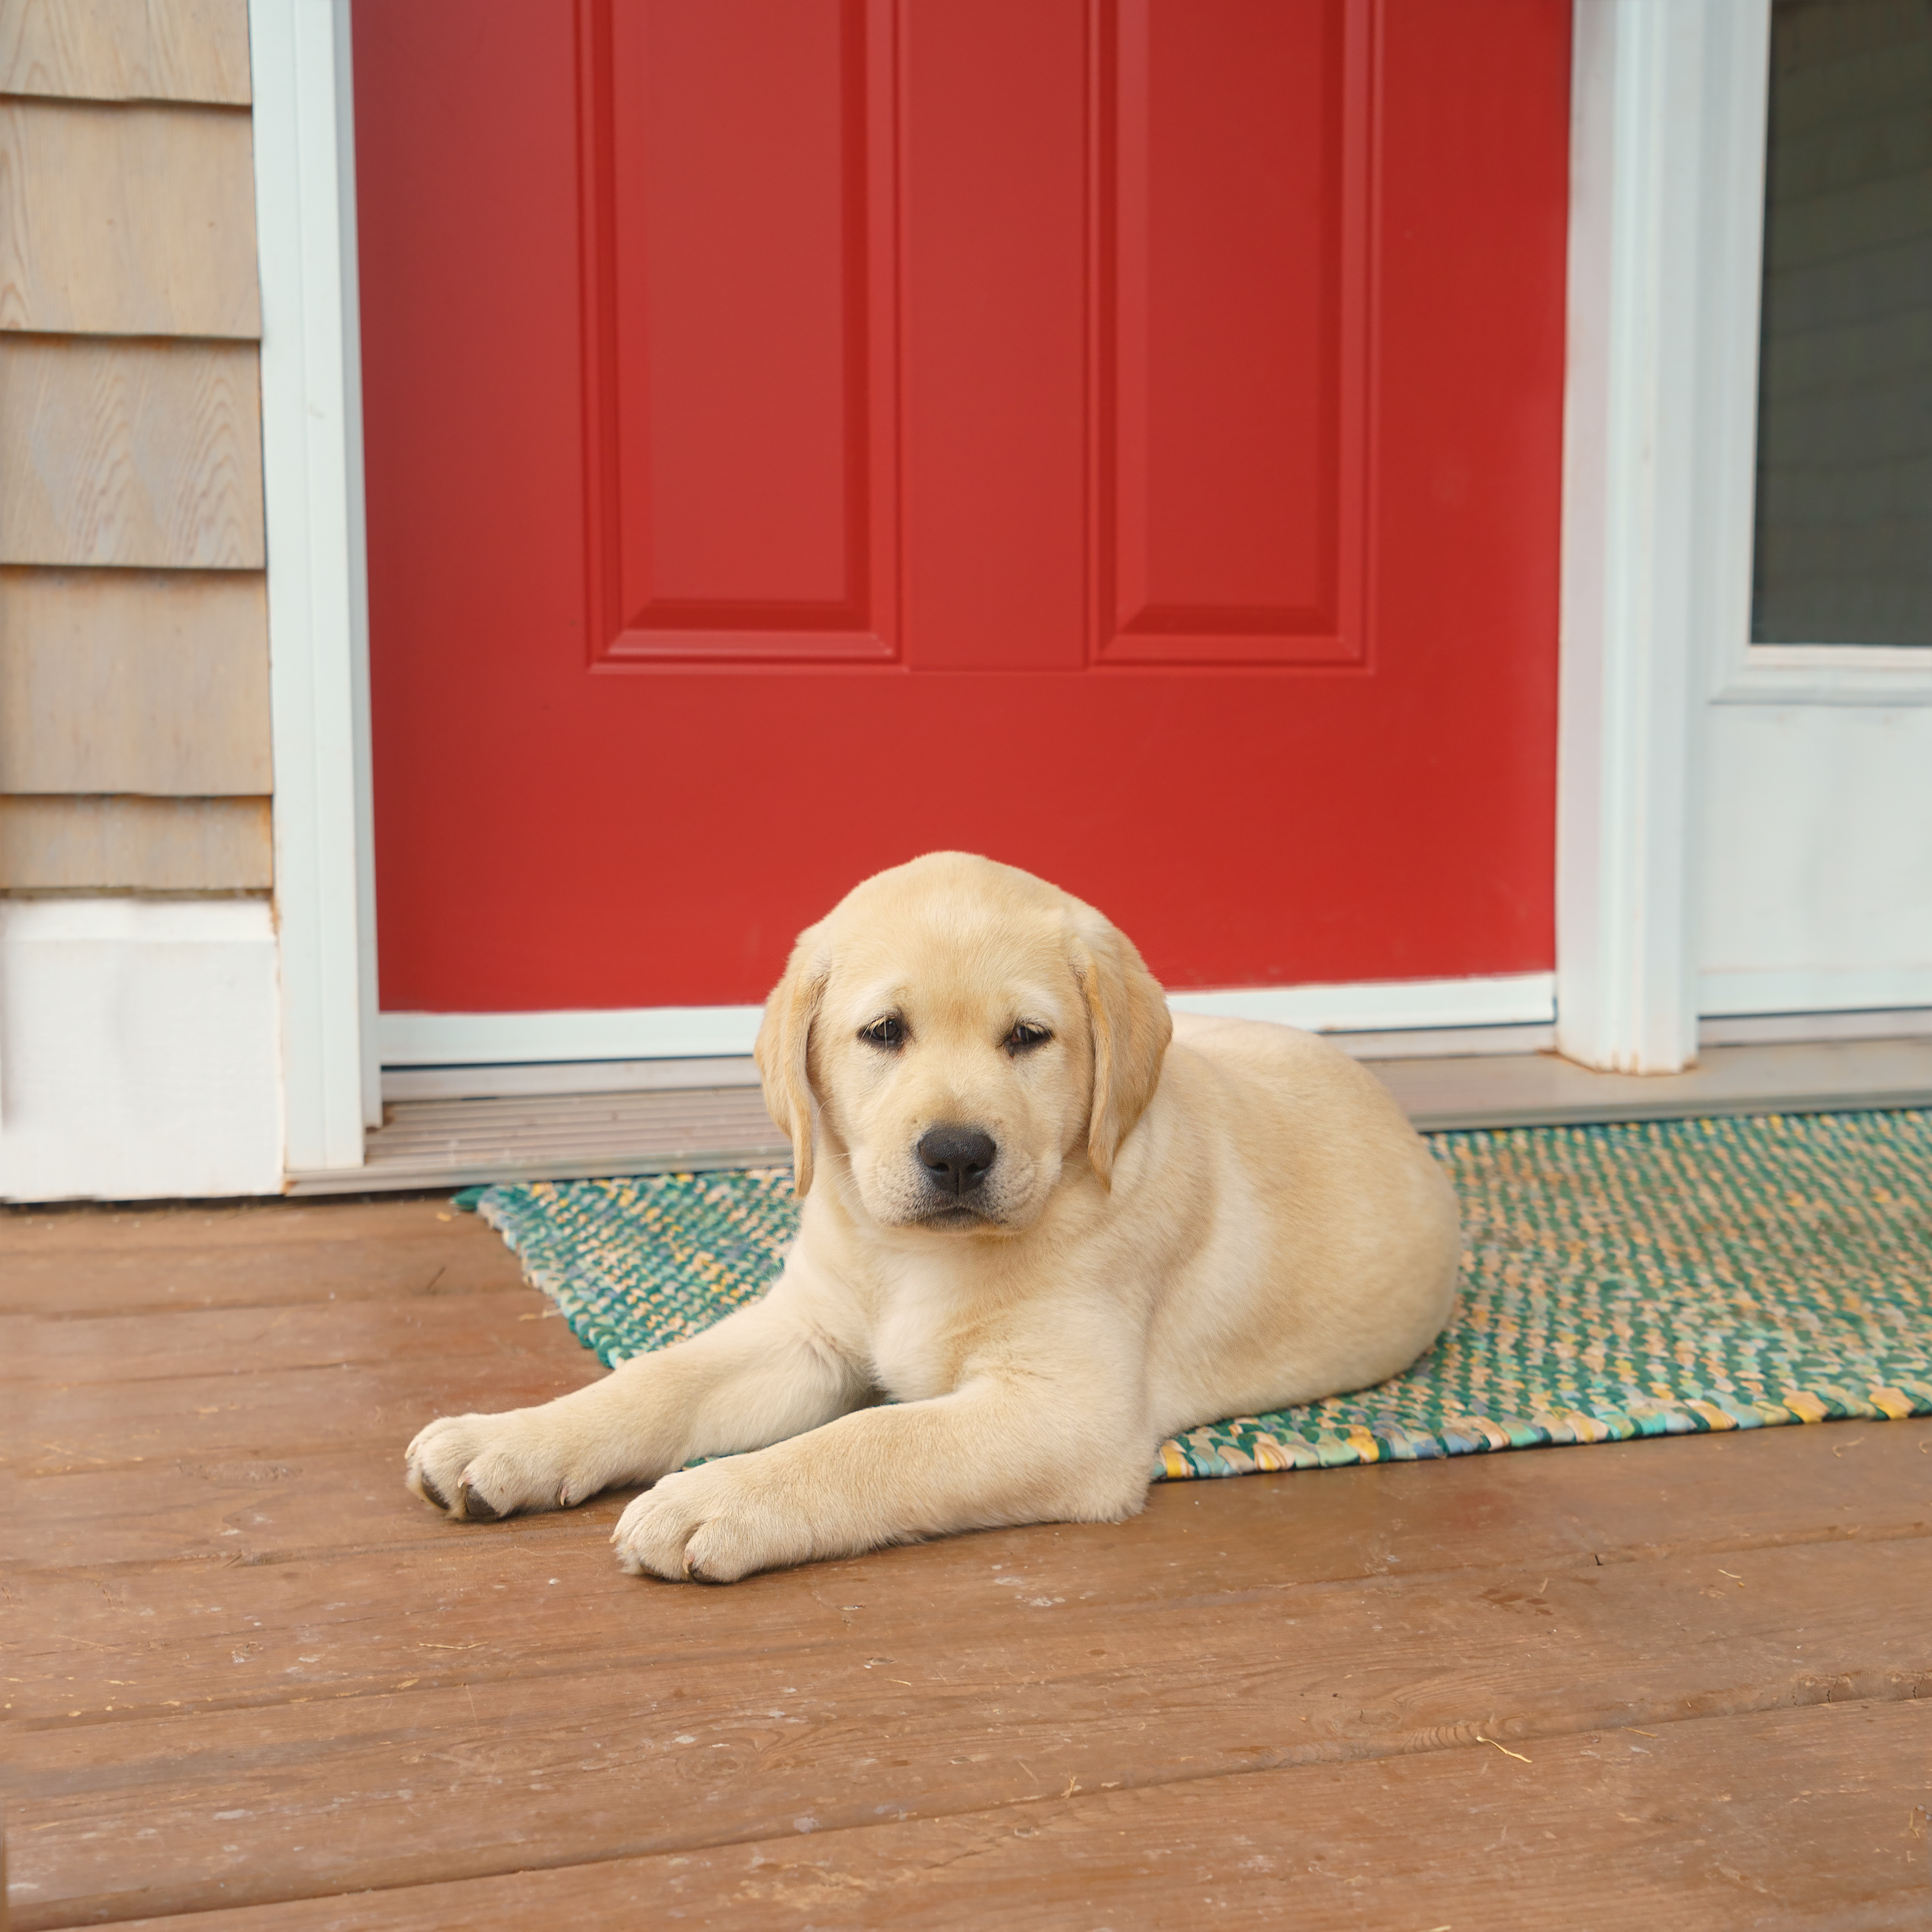 A yellow Labrador Retriever puppy lays on a multicolored green and yellow mat outside of a red front door on a wooden front porch.